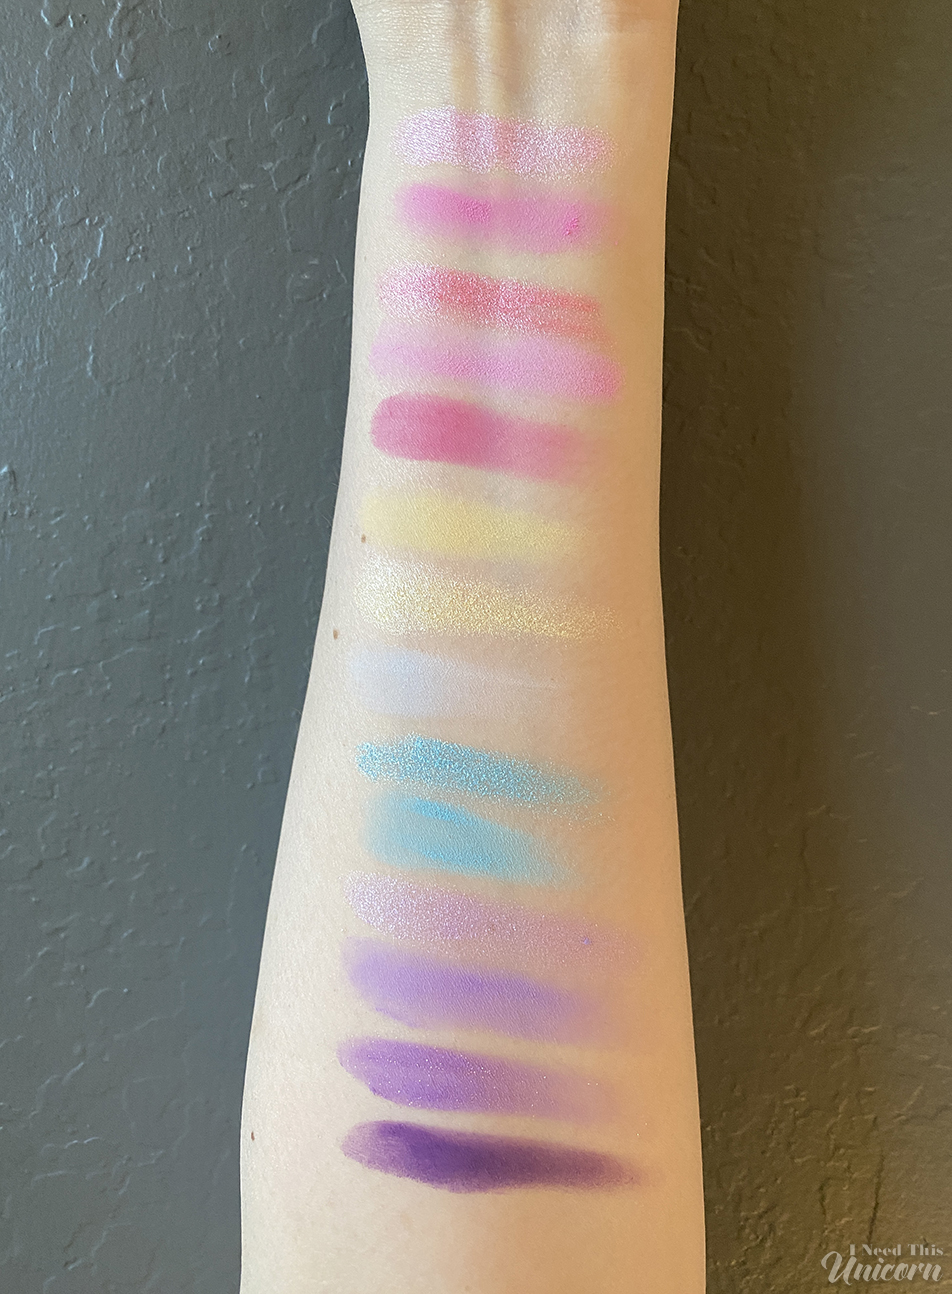 Jeffree Star Cosmetics Cotton Candy Queen Palette Arm Swatches